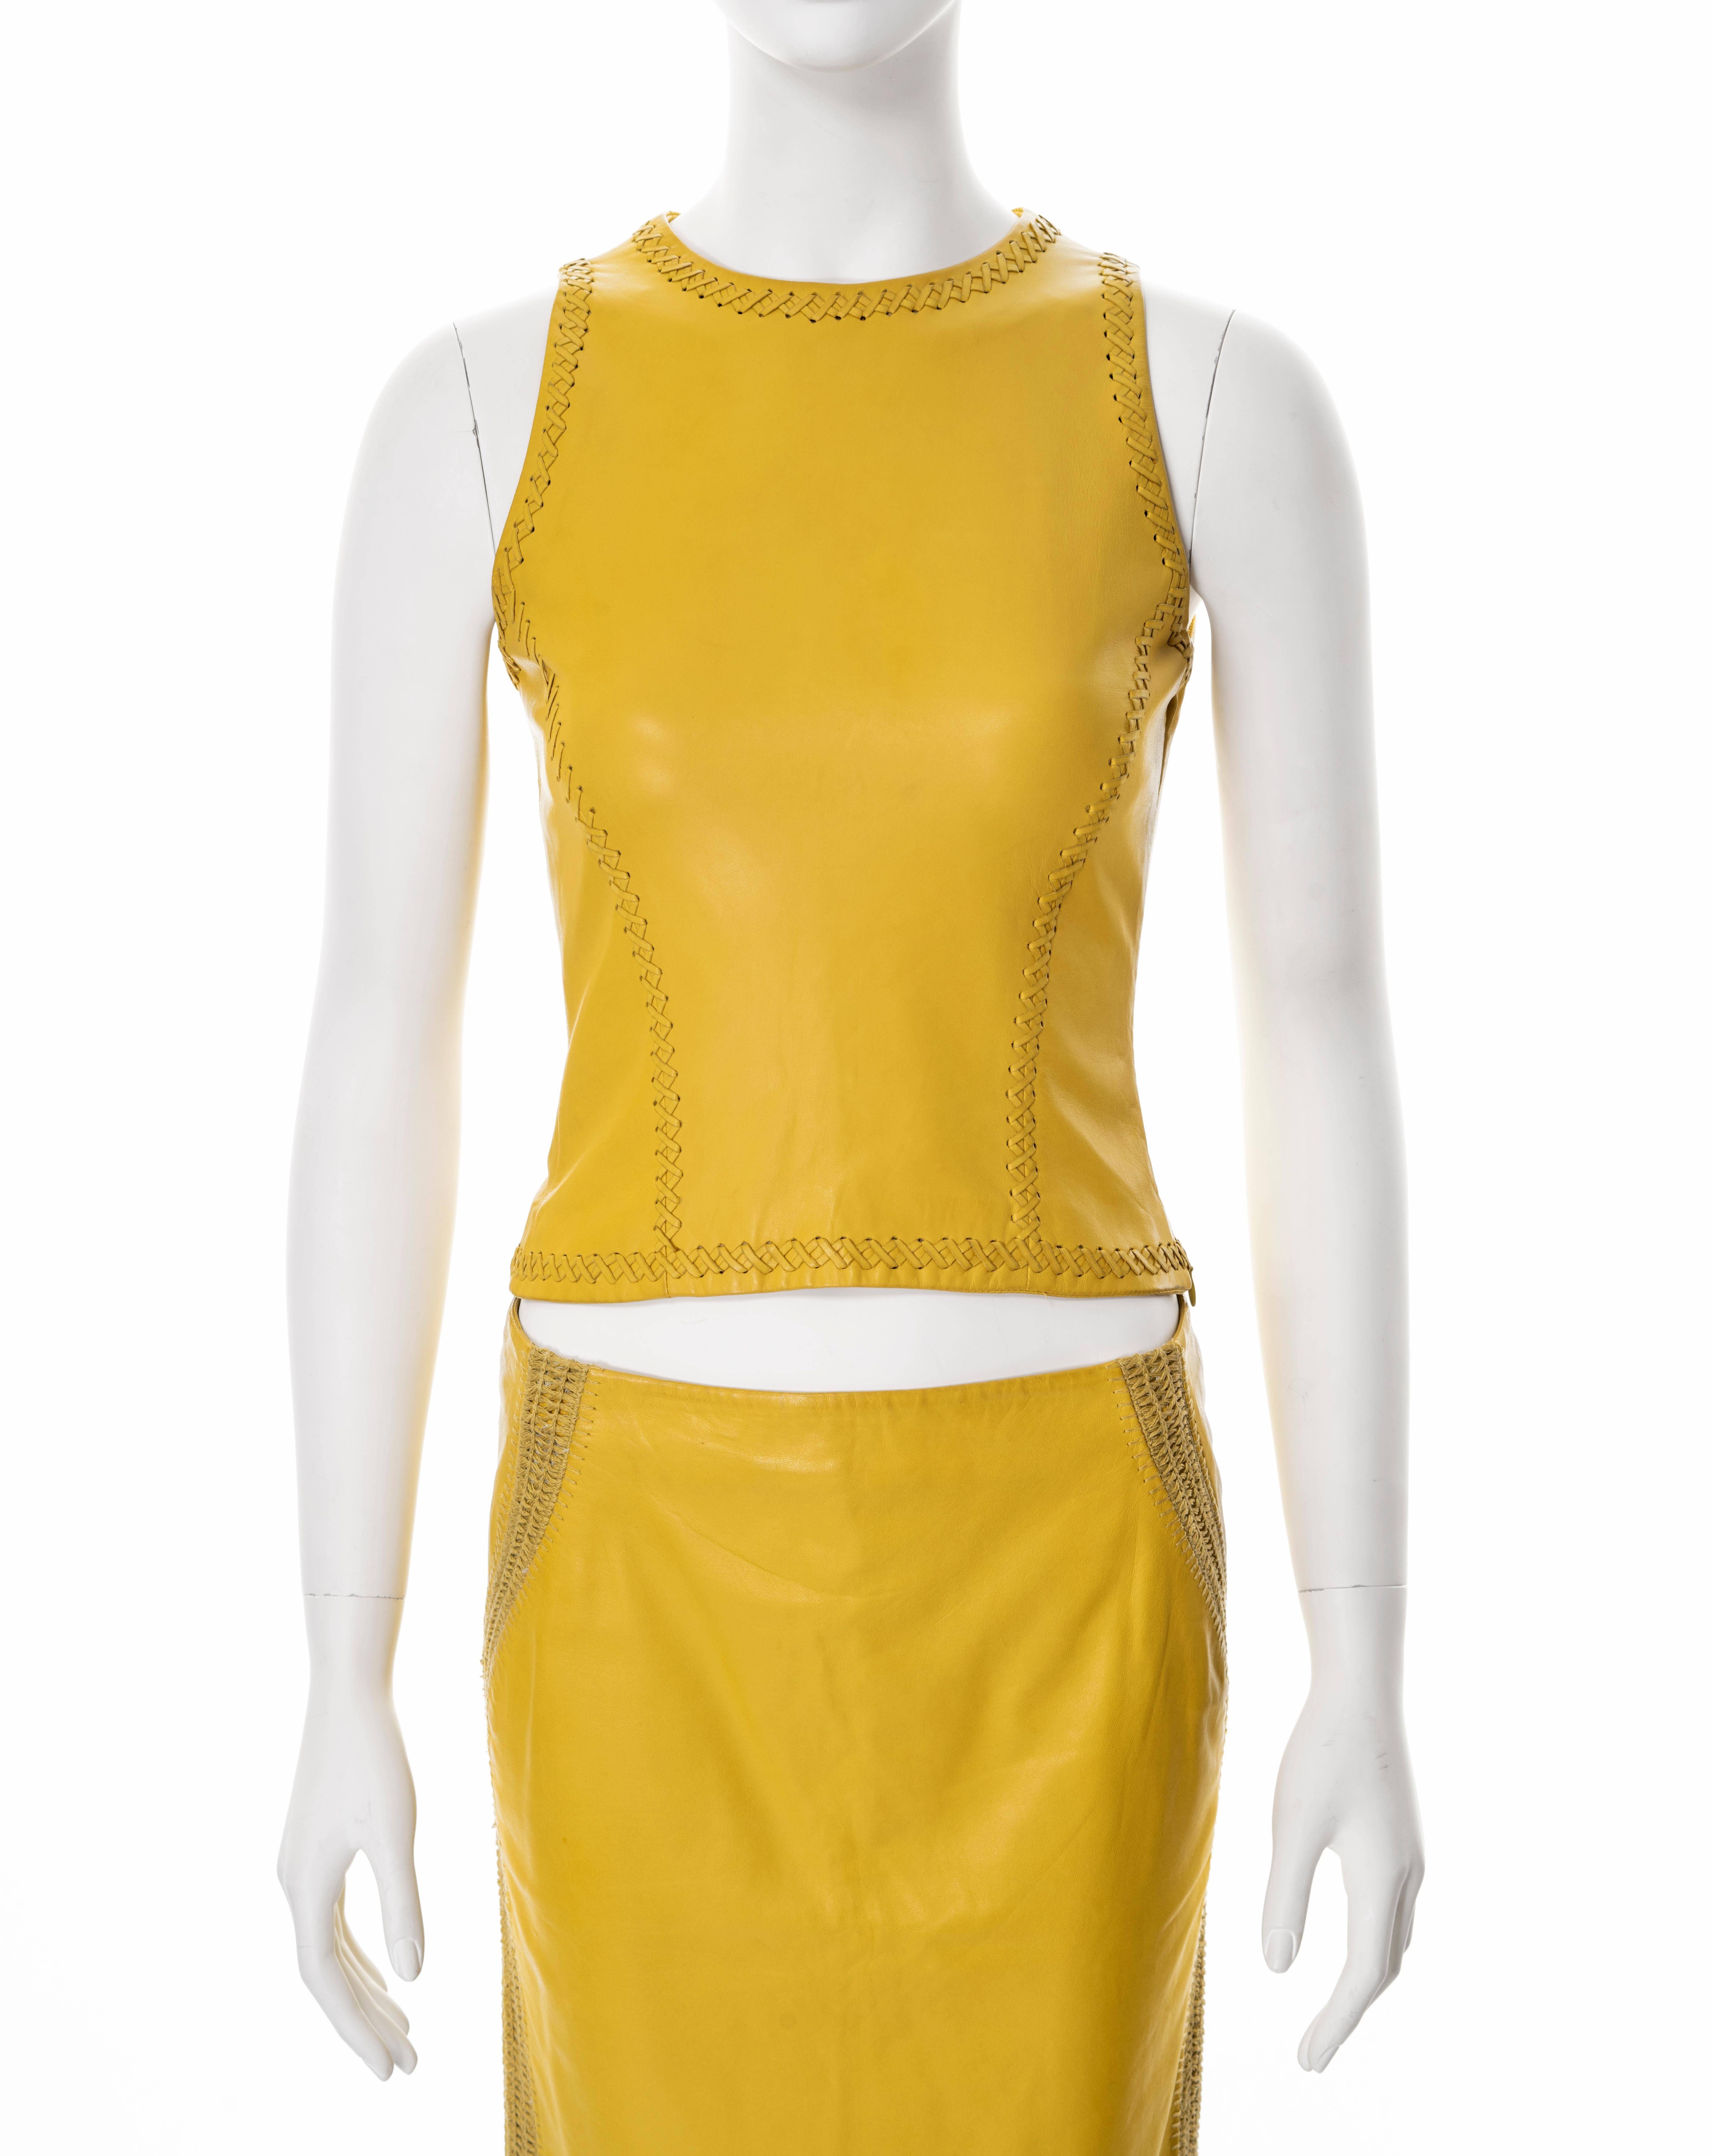 Gianni Versace yellow lambskin leather top and skirt, ss 2003 In Good Condition For Sale In London, GB